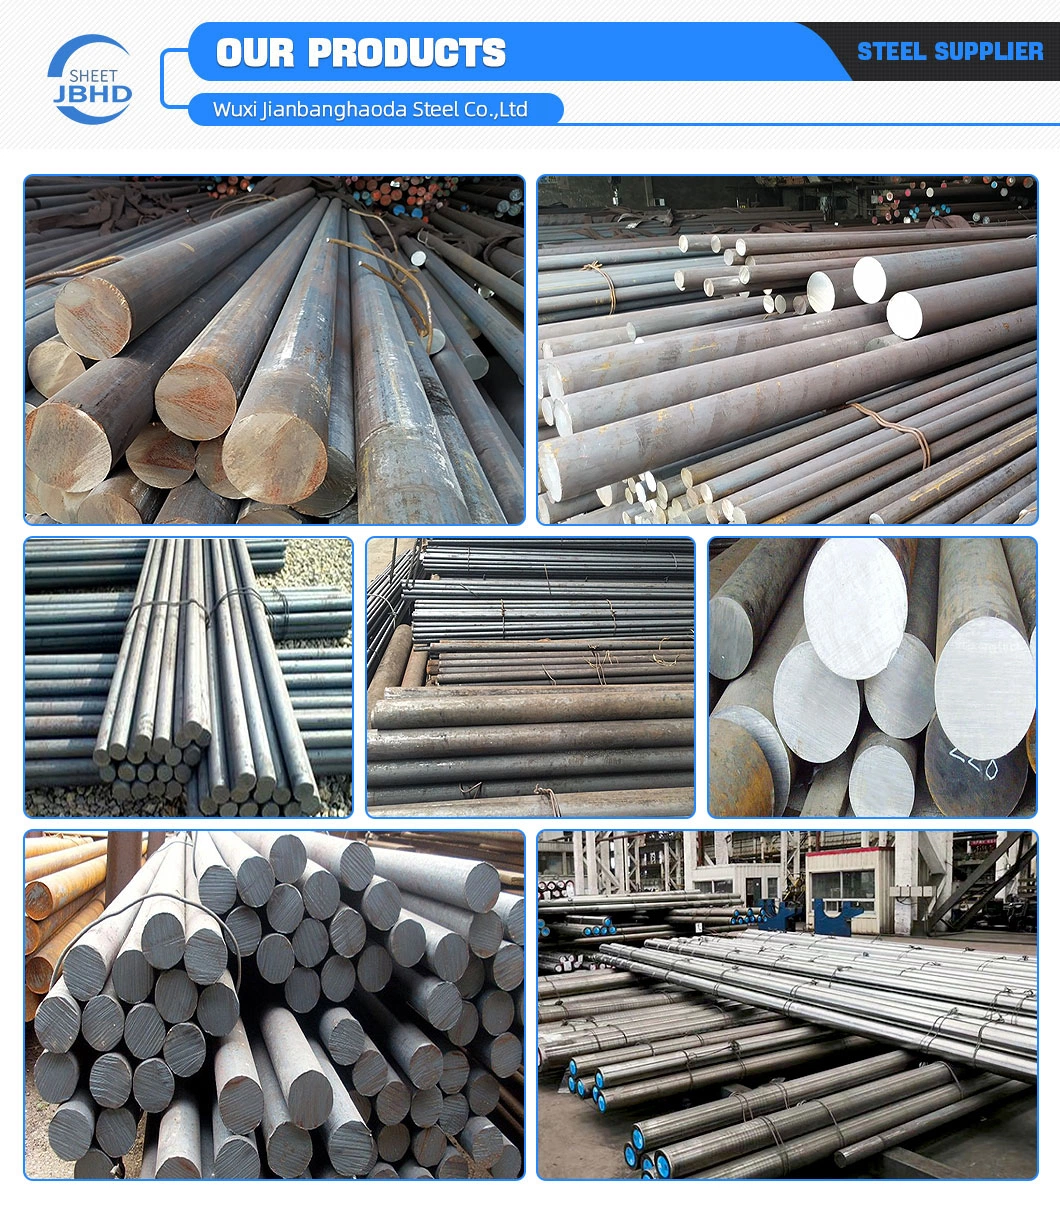 ASTM SAE 1020 S20c Ss440 A36 Q235 1045 S45c C45 4140 En19 Scm440 40cr B7 42CrMo4 12L14 1215 1144 Cold Finished Cold Drawn Bright Steel Round Bar Steel Bar